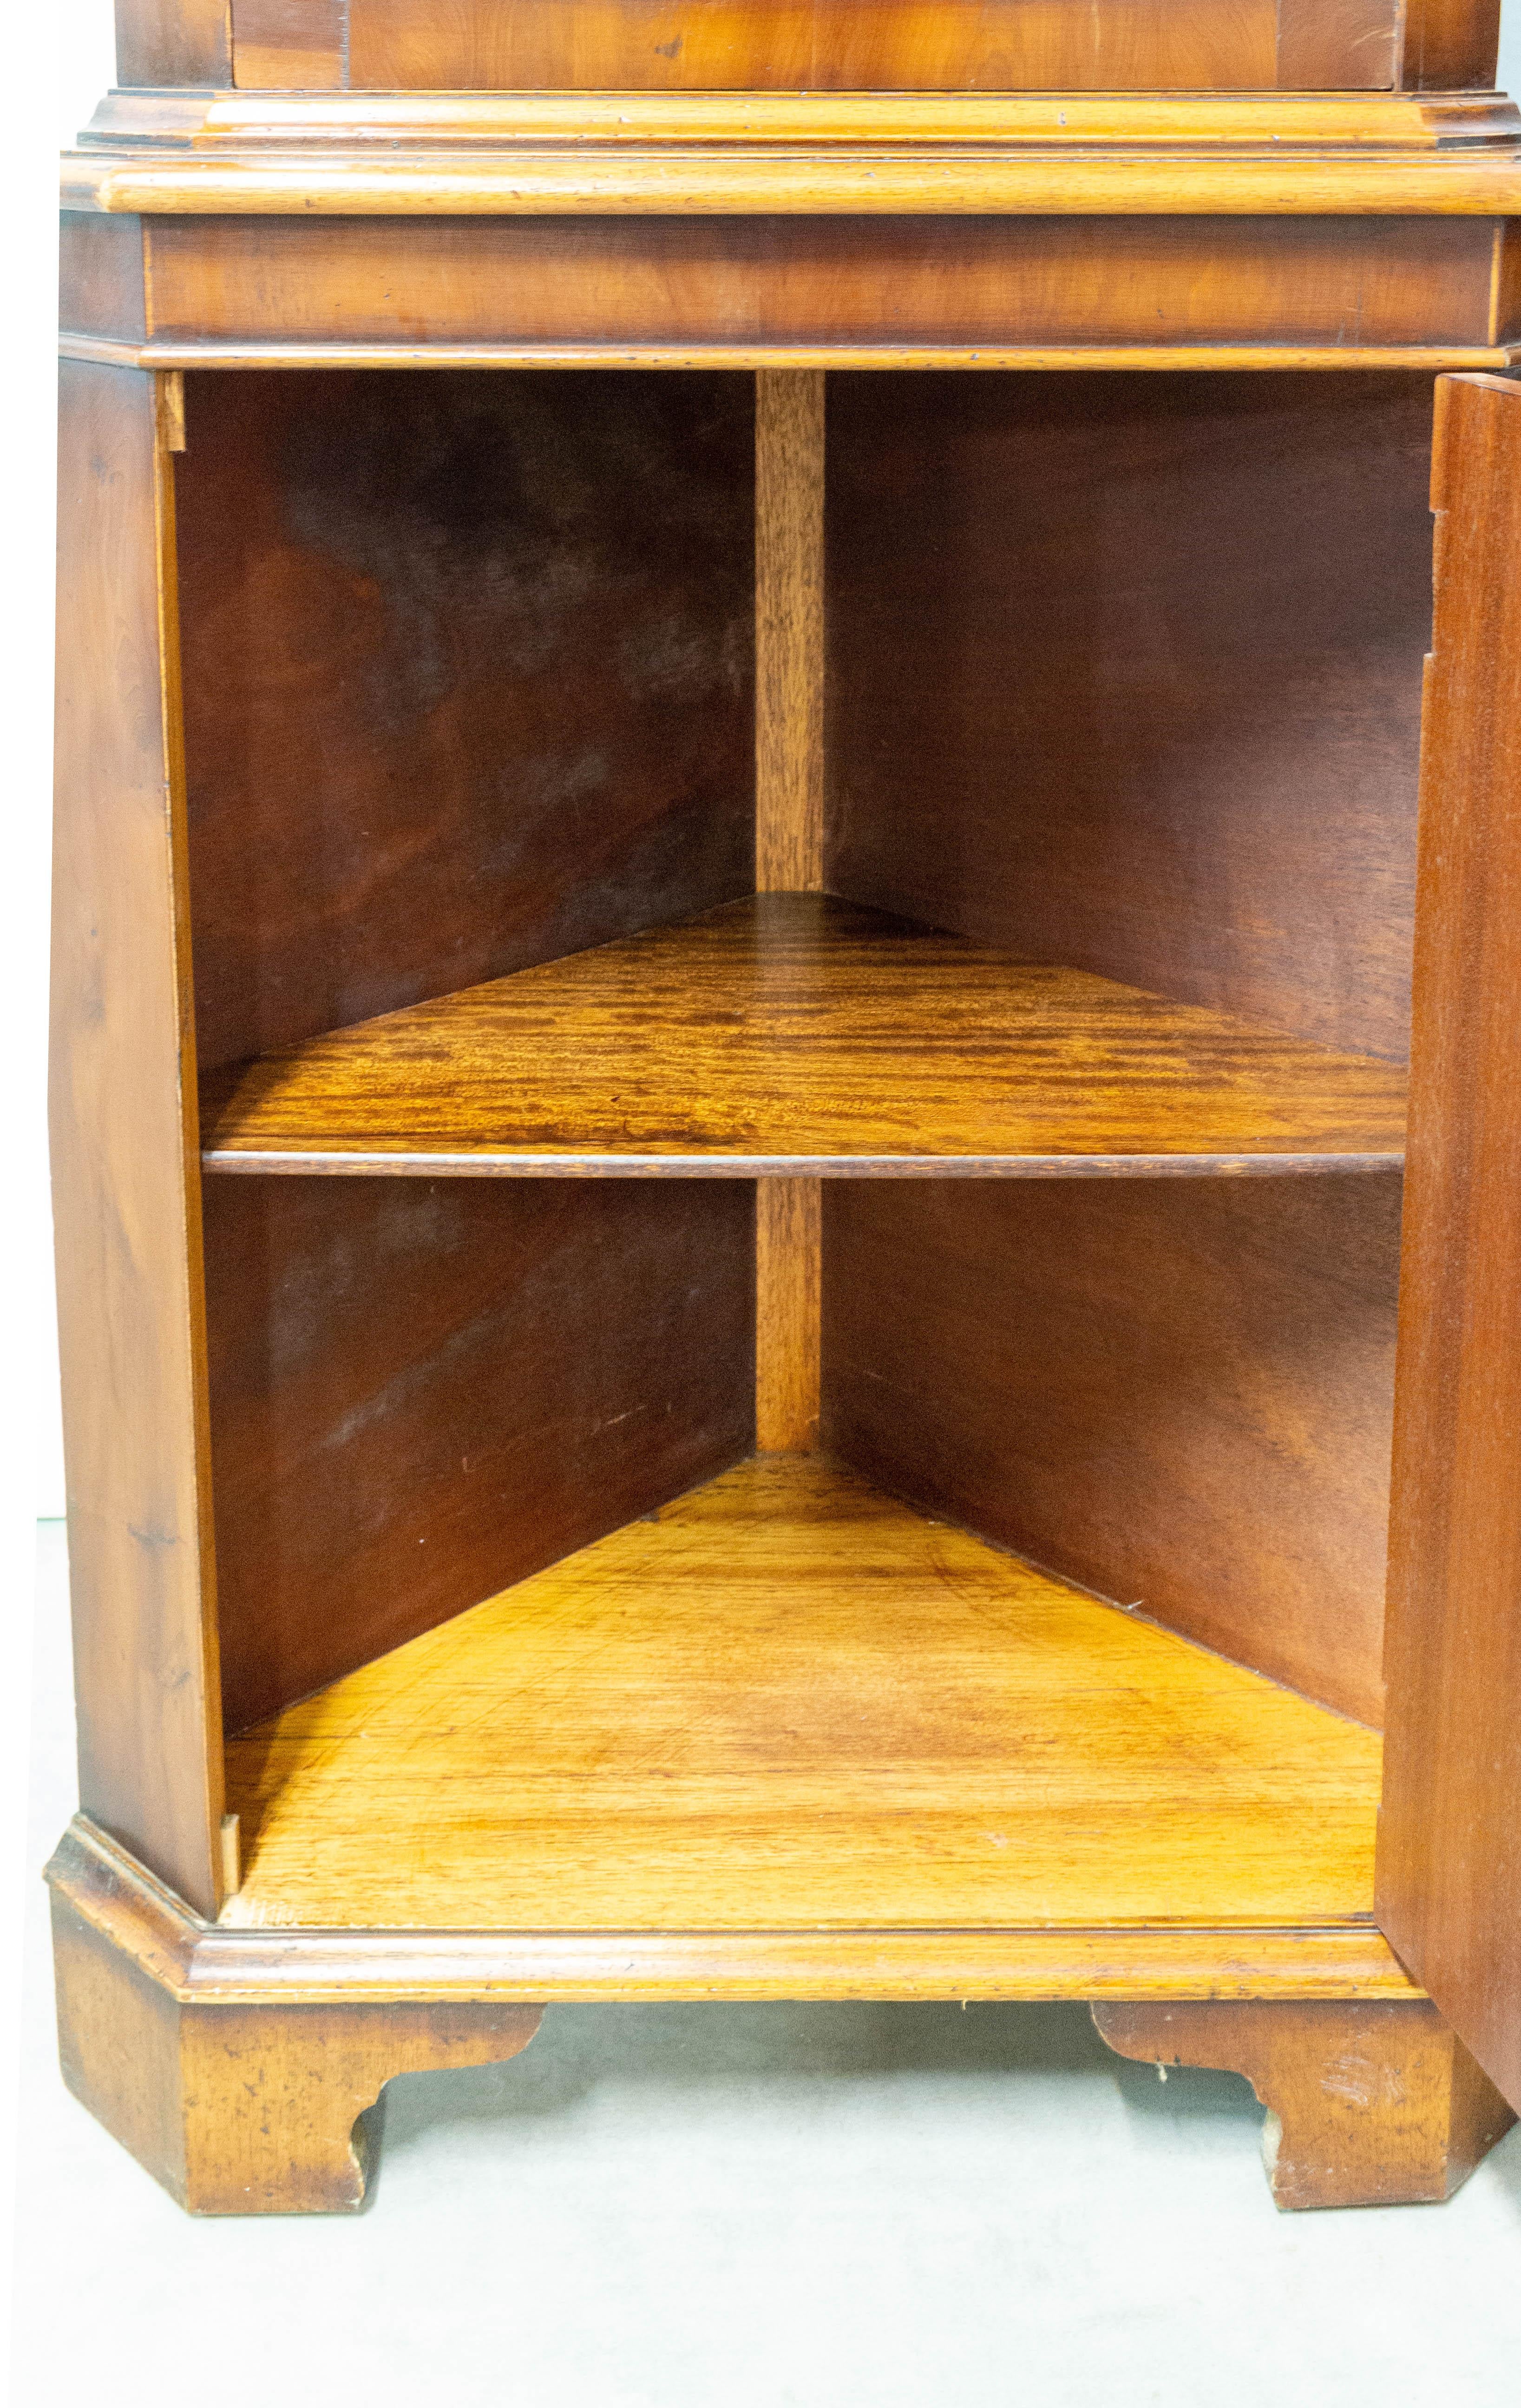 Pair of yew wood showcase cabinets corner vitrines
French midcentury, circa 1960
Measure of the fassade: 25.6 in. (65 cm)
Good condition with some marks of use

For shipping:
2 packs: 185/46/46 cm 18 kg.
  